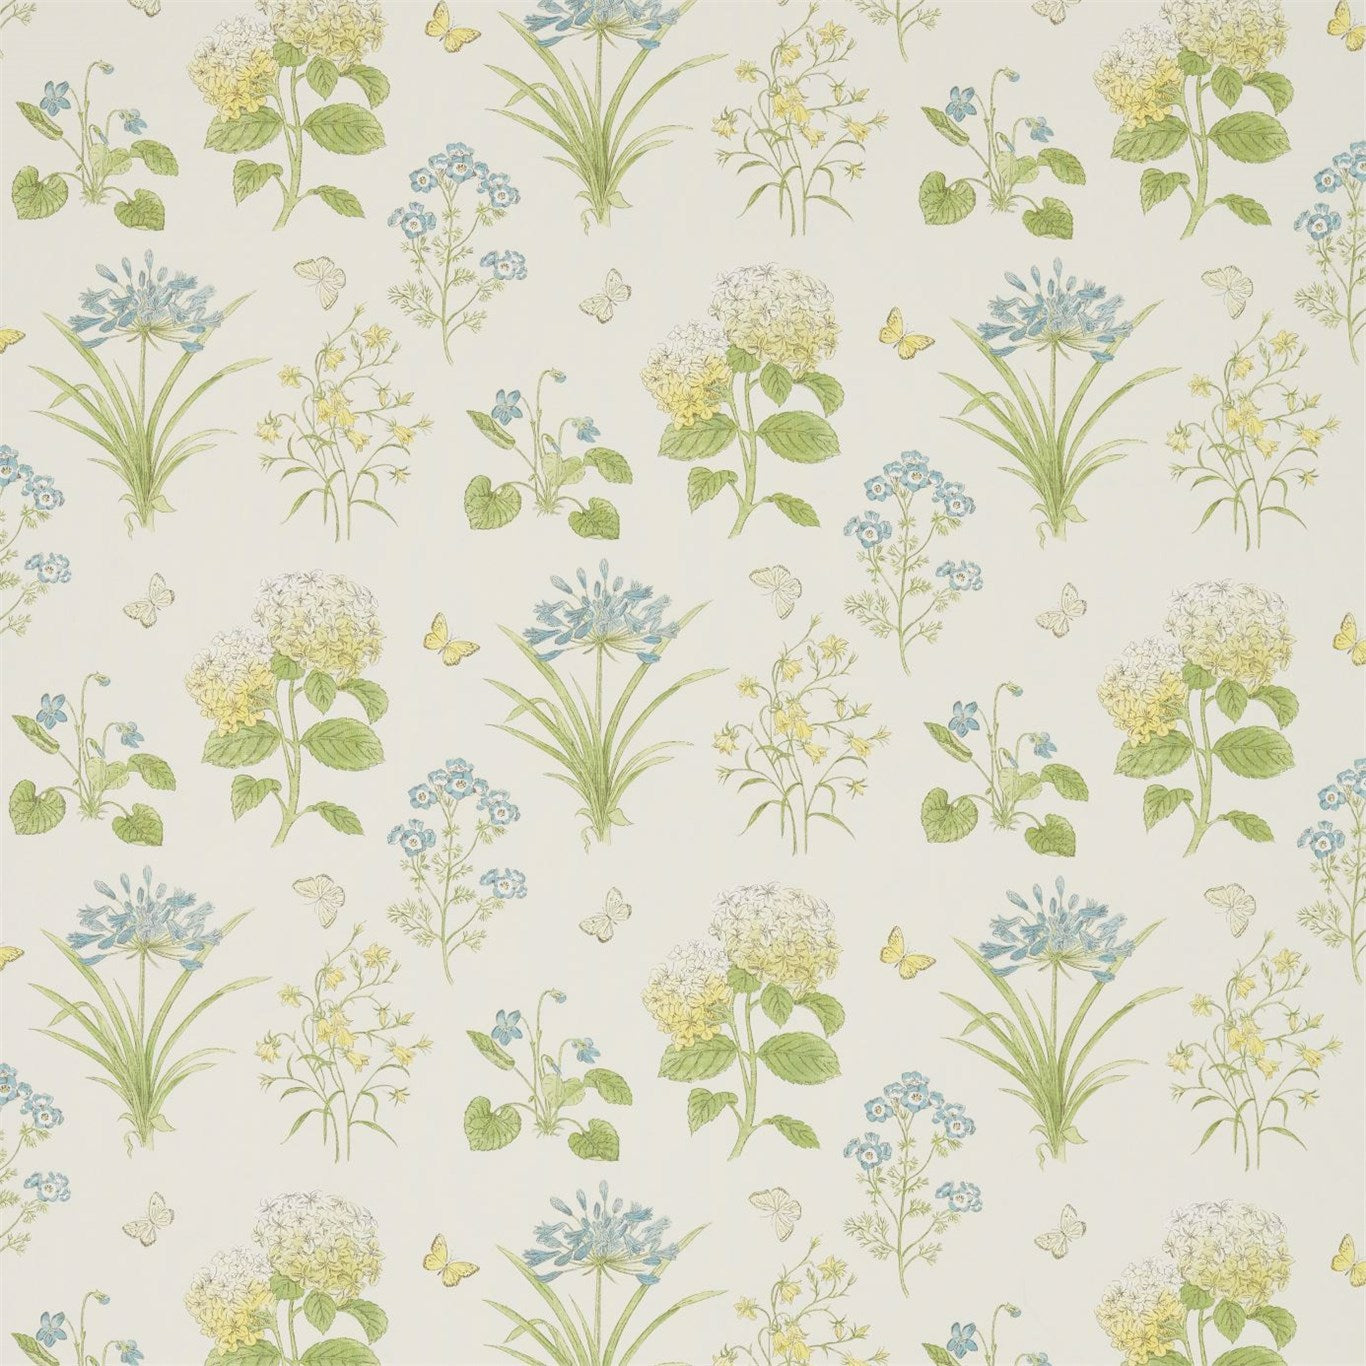 Harebells and Violets Lemon/Teal Fabric By Sanderson